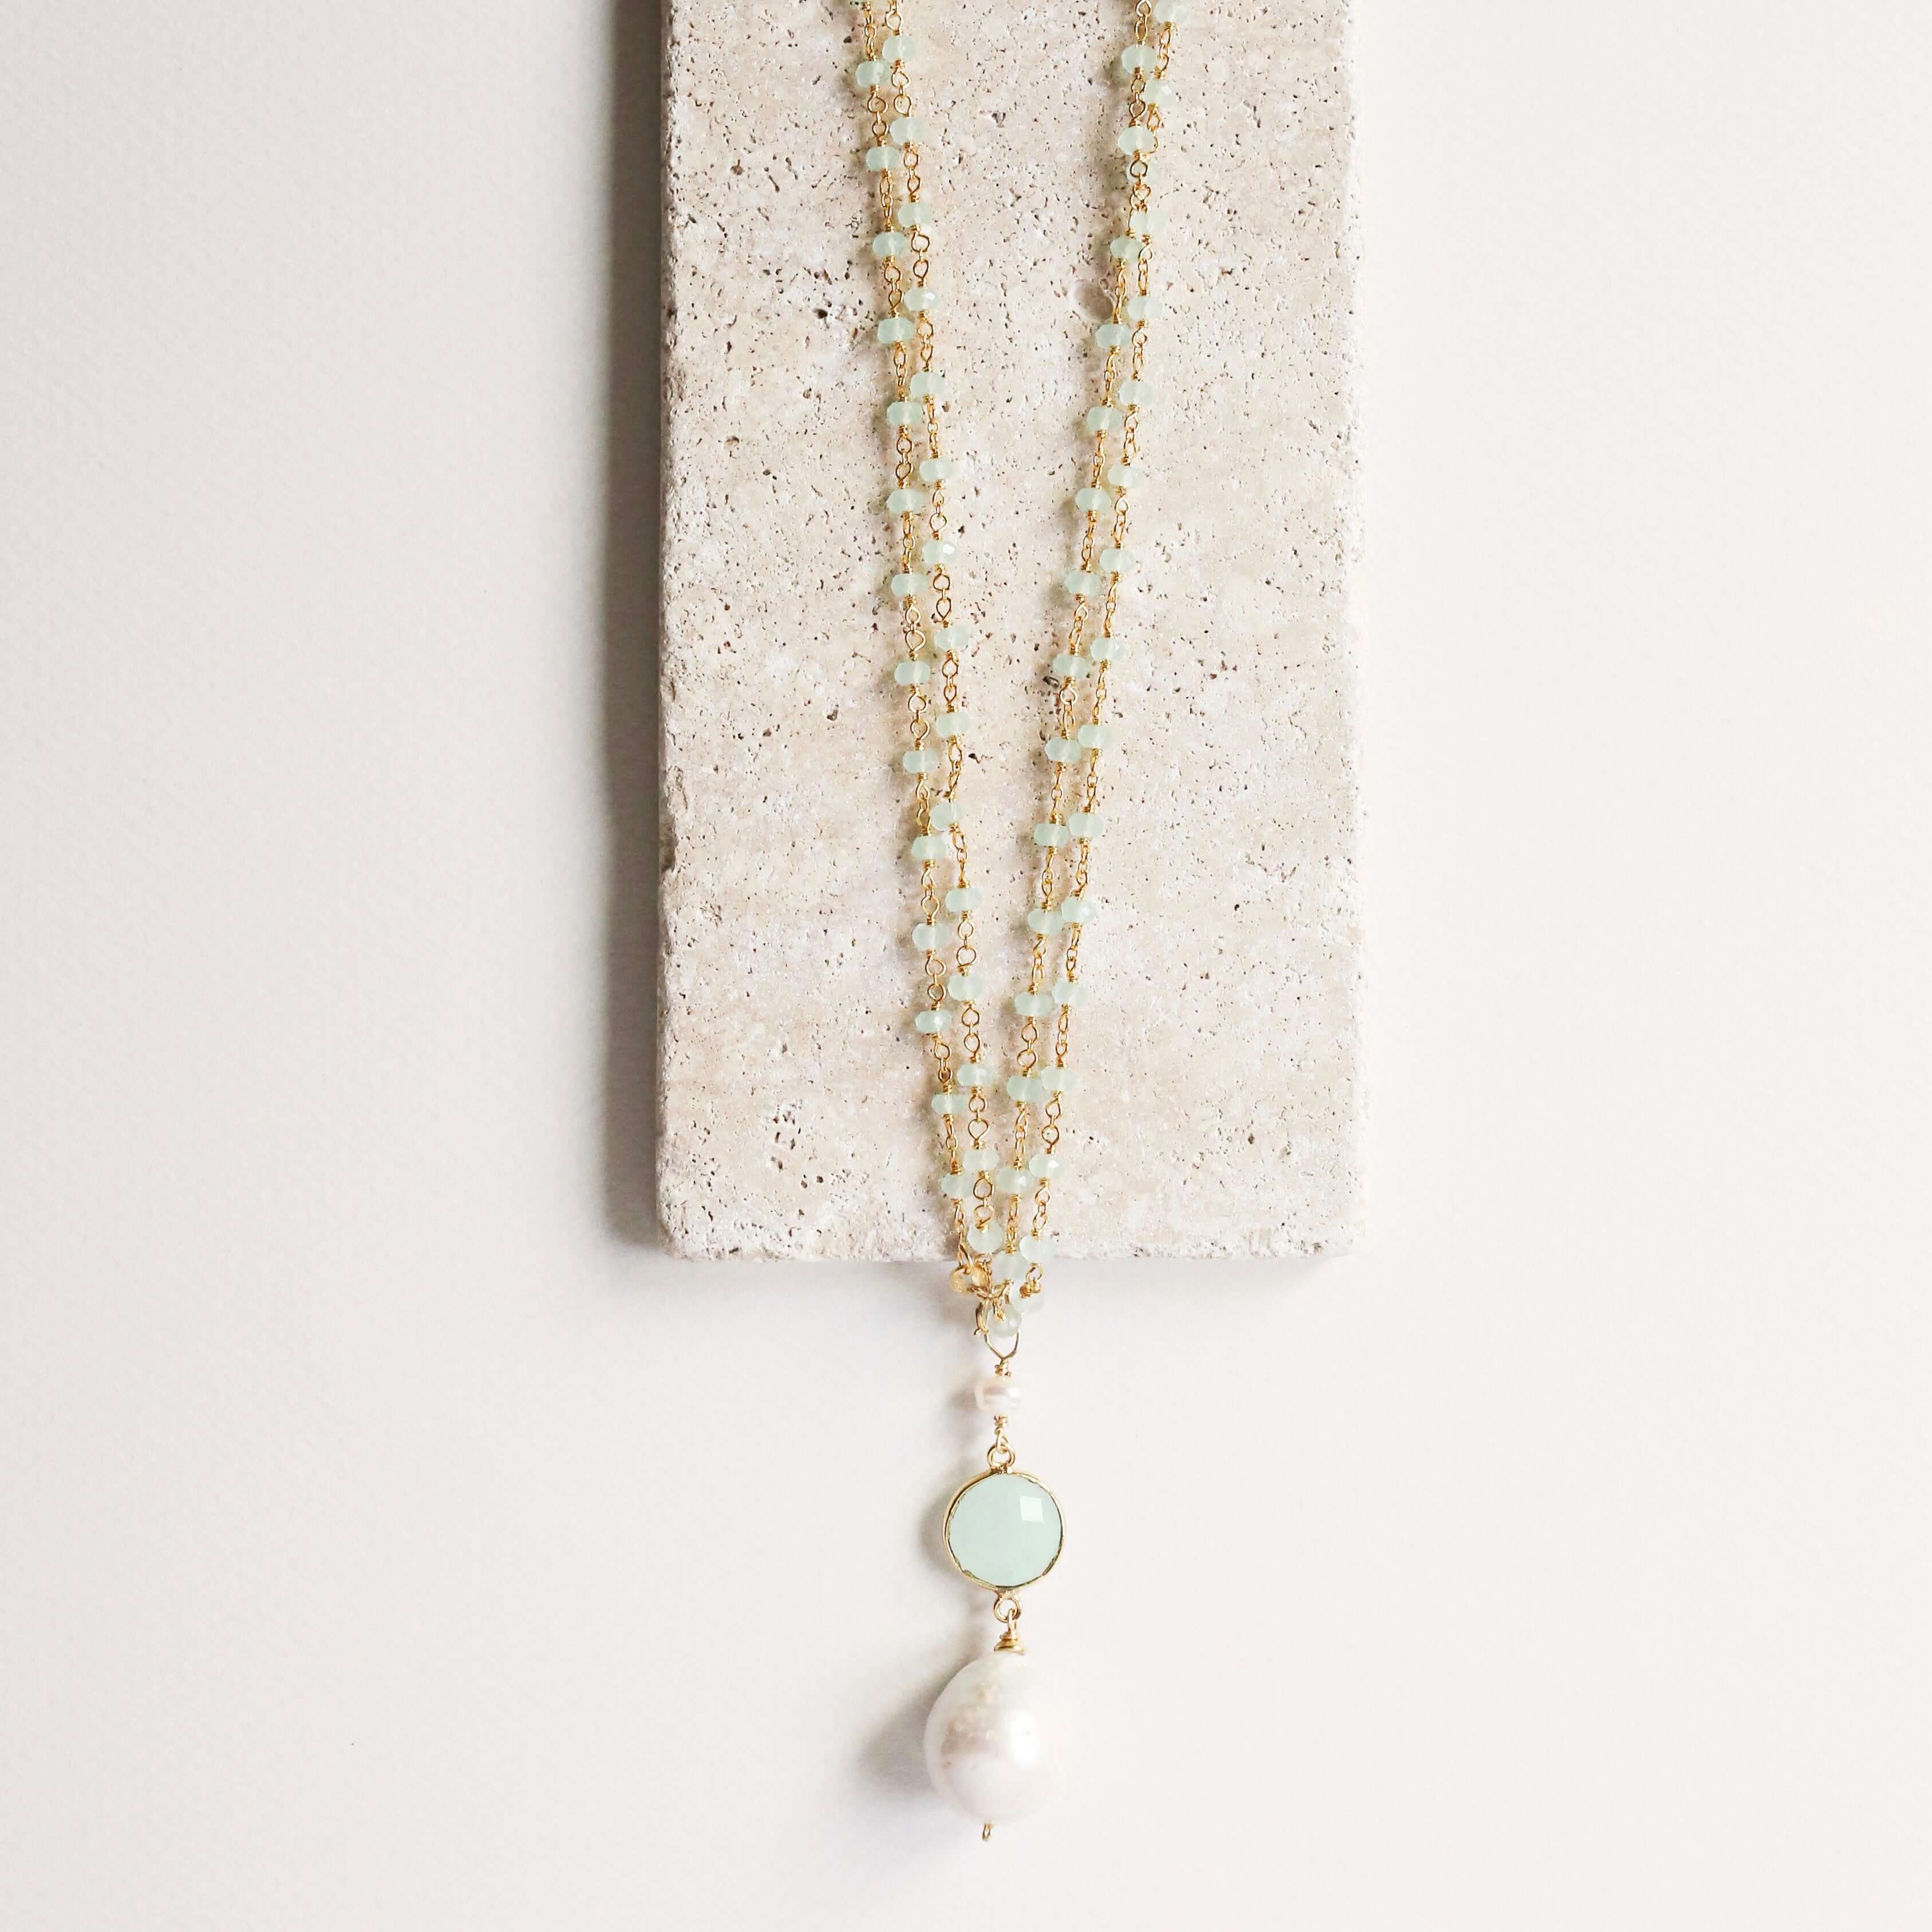 Convertible Gemstone Necklace with baroque pearl and Aqua Chalcedony Bezel